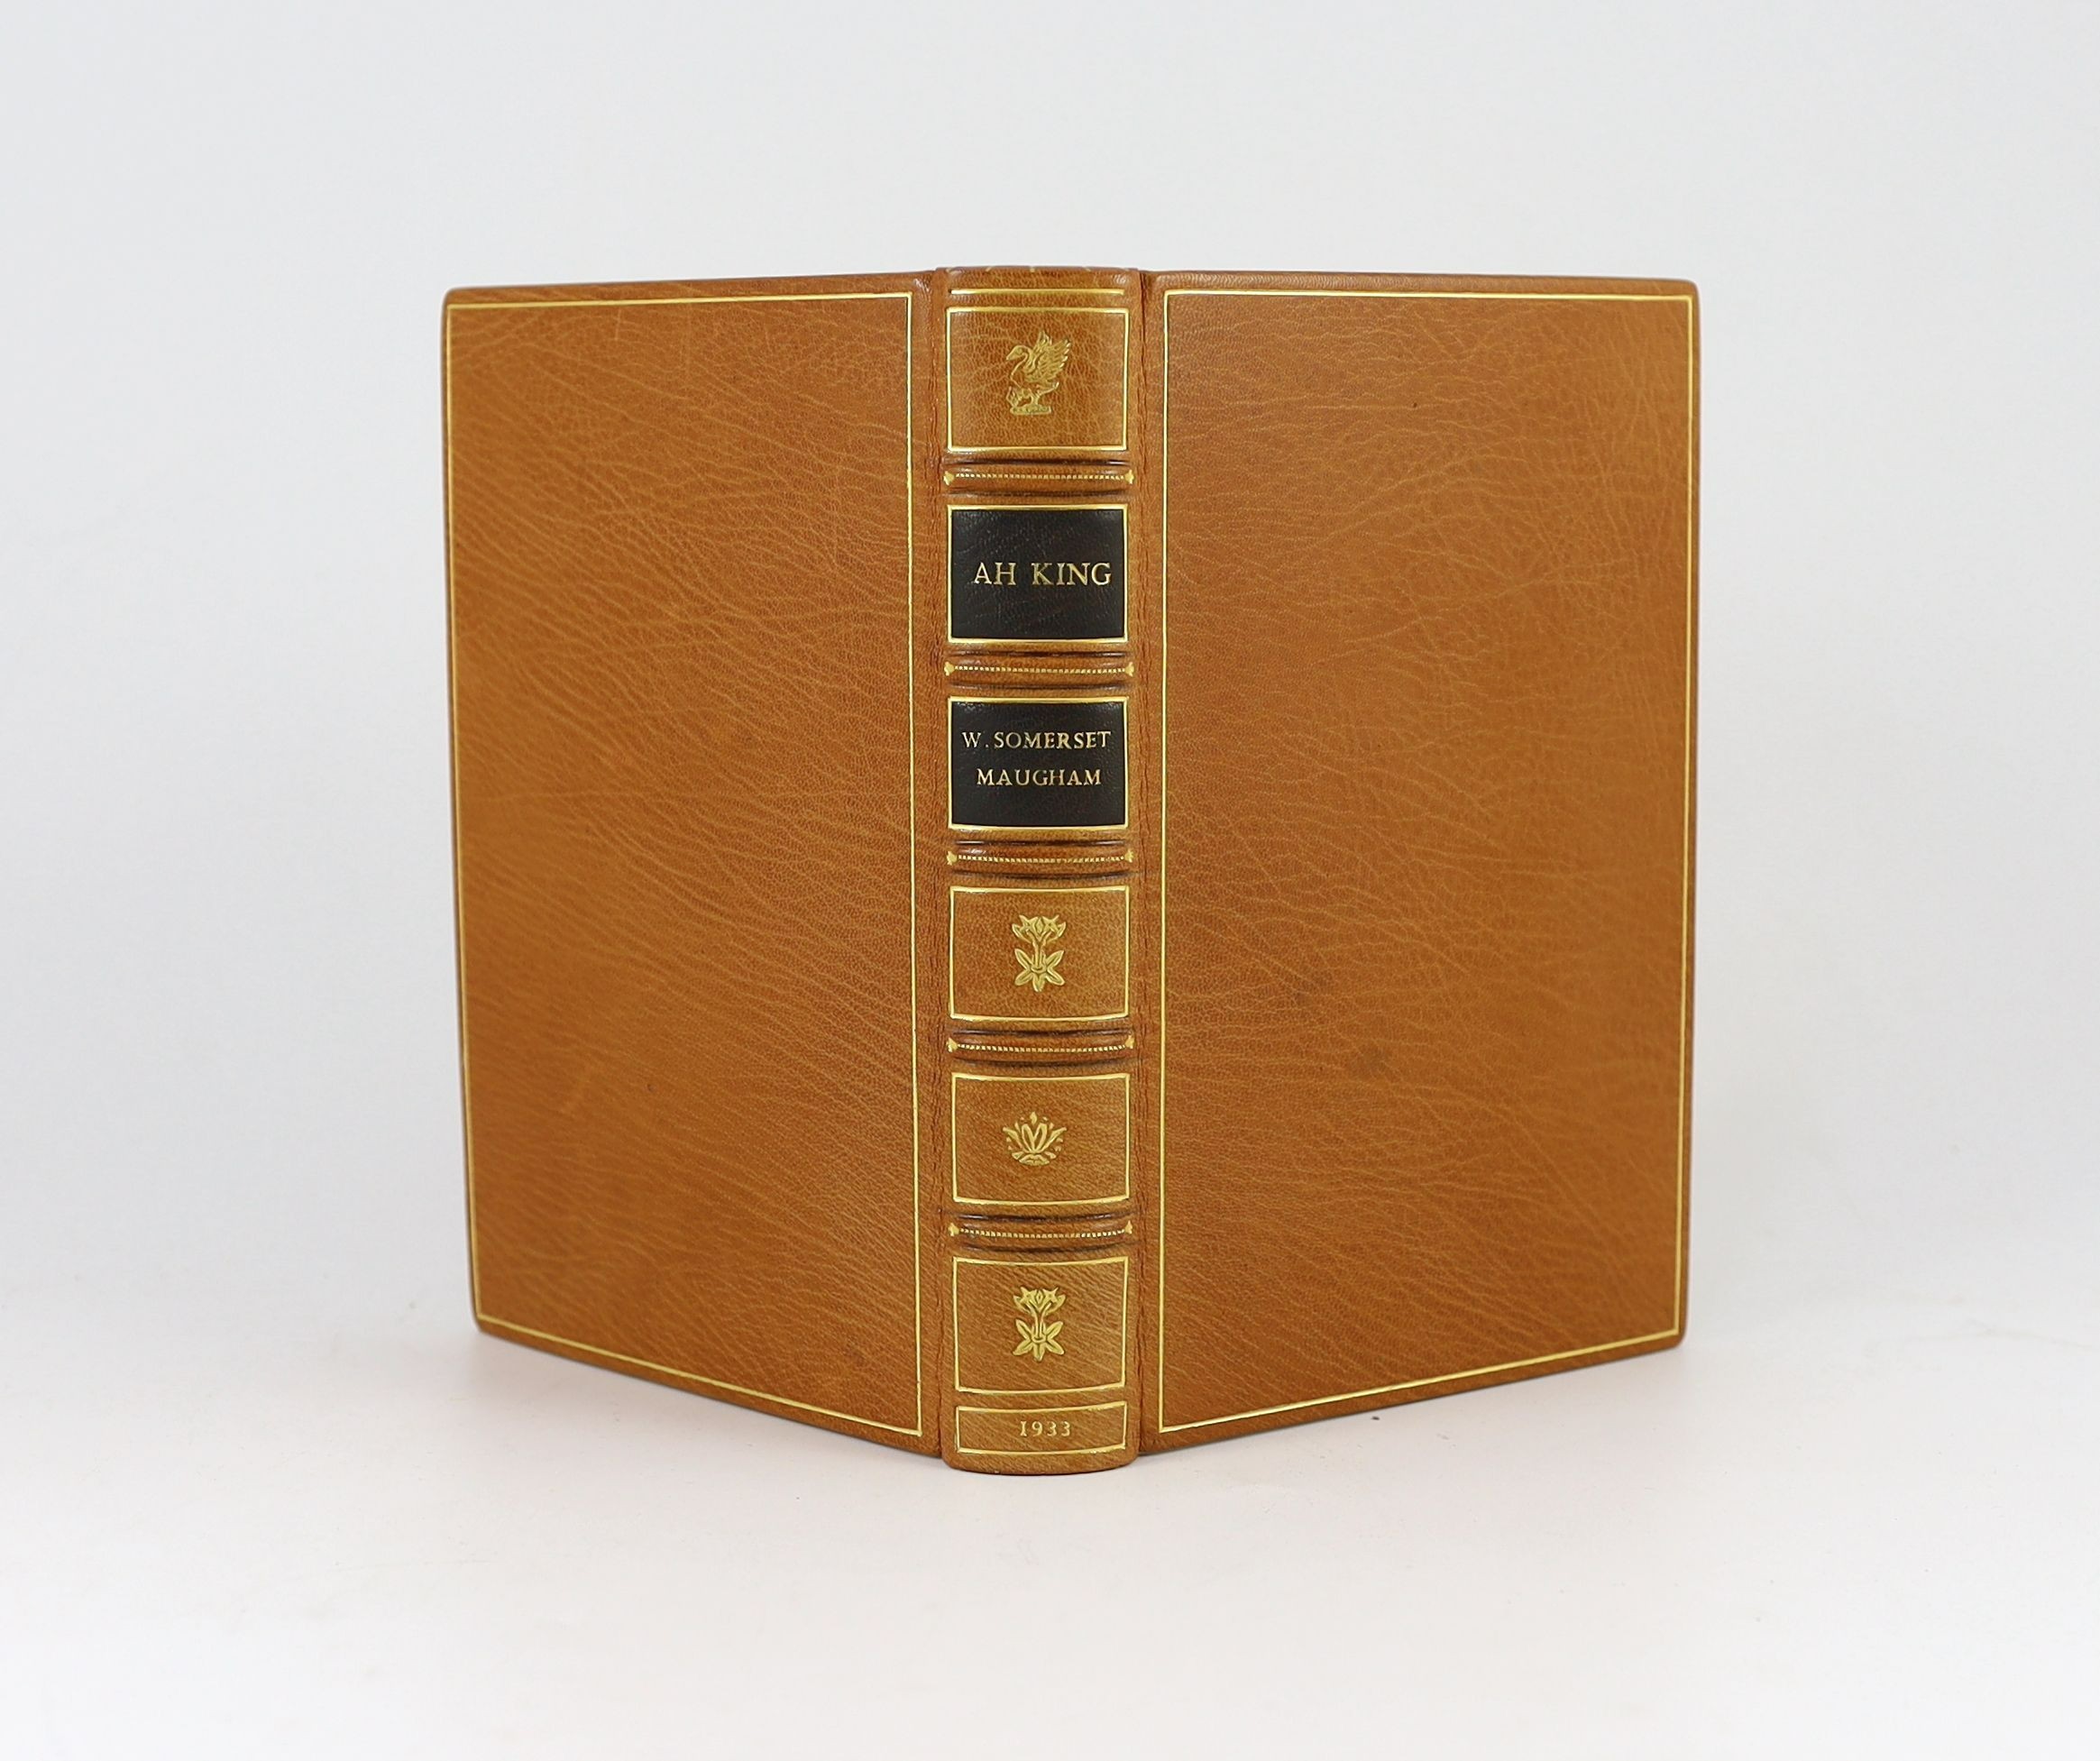 Maugham, William Somerset - Ah King, 1st edition, one of 175, signed, 8vo, calf gilt by Sangorski and Sutcliffe, William Heinemann, London, 1933